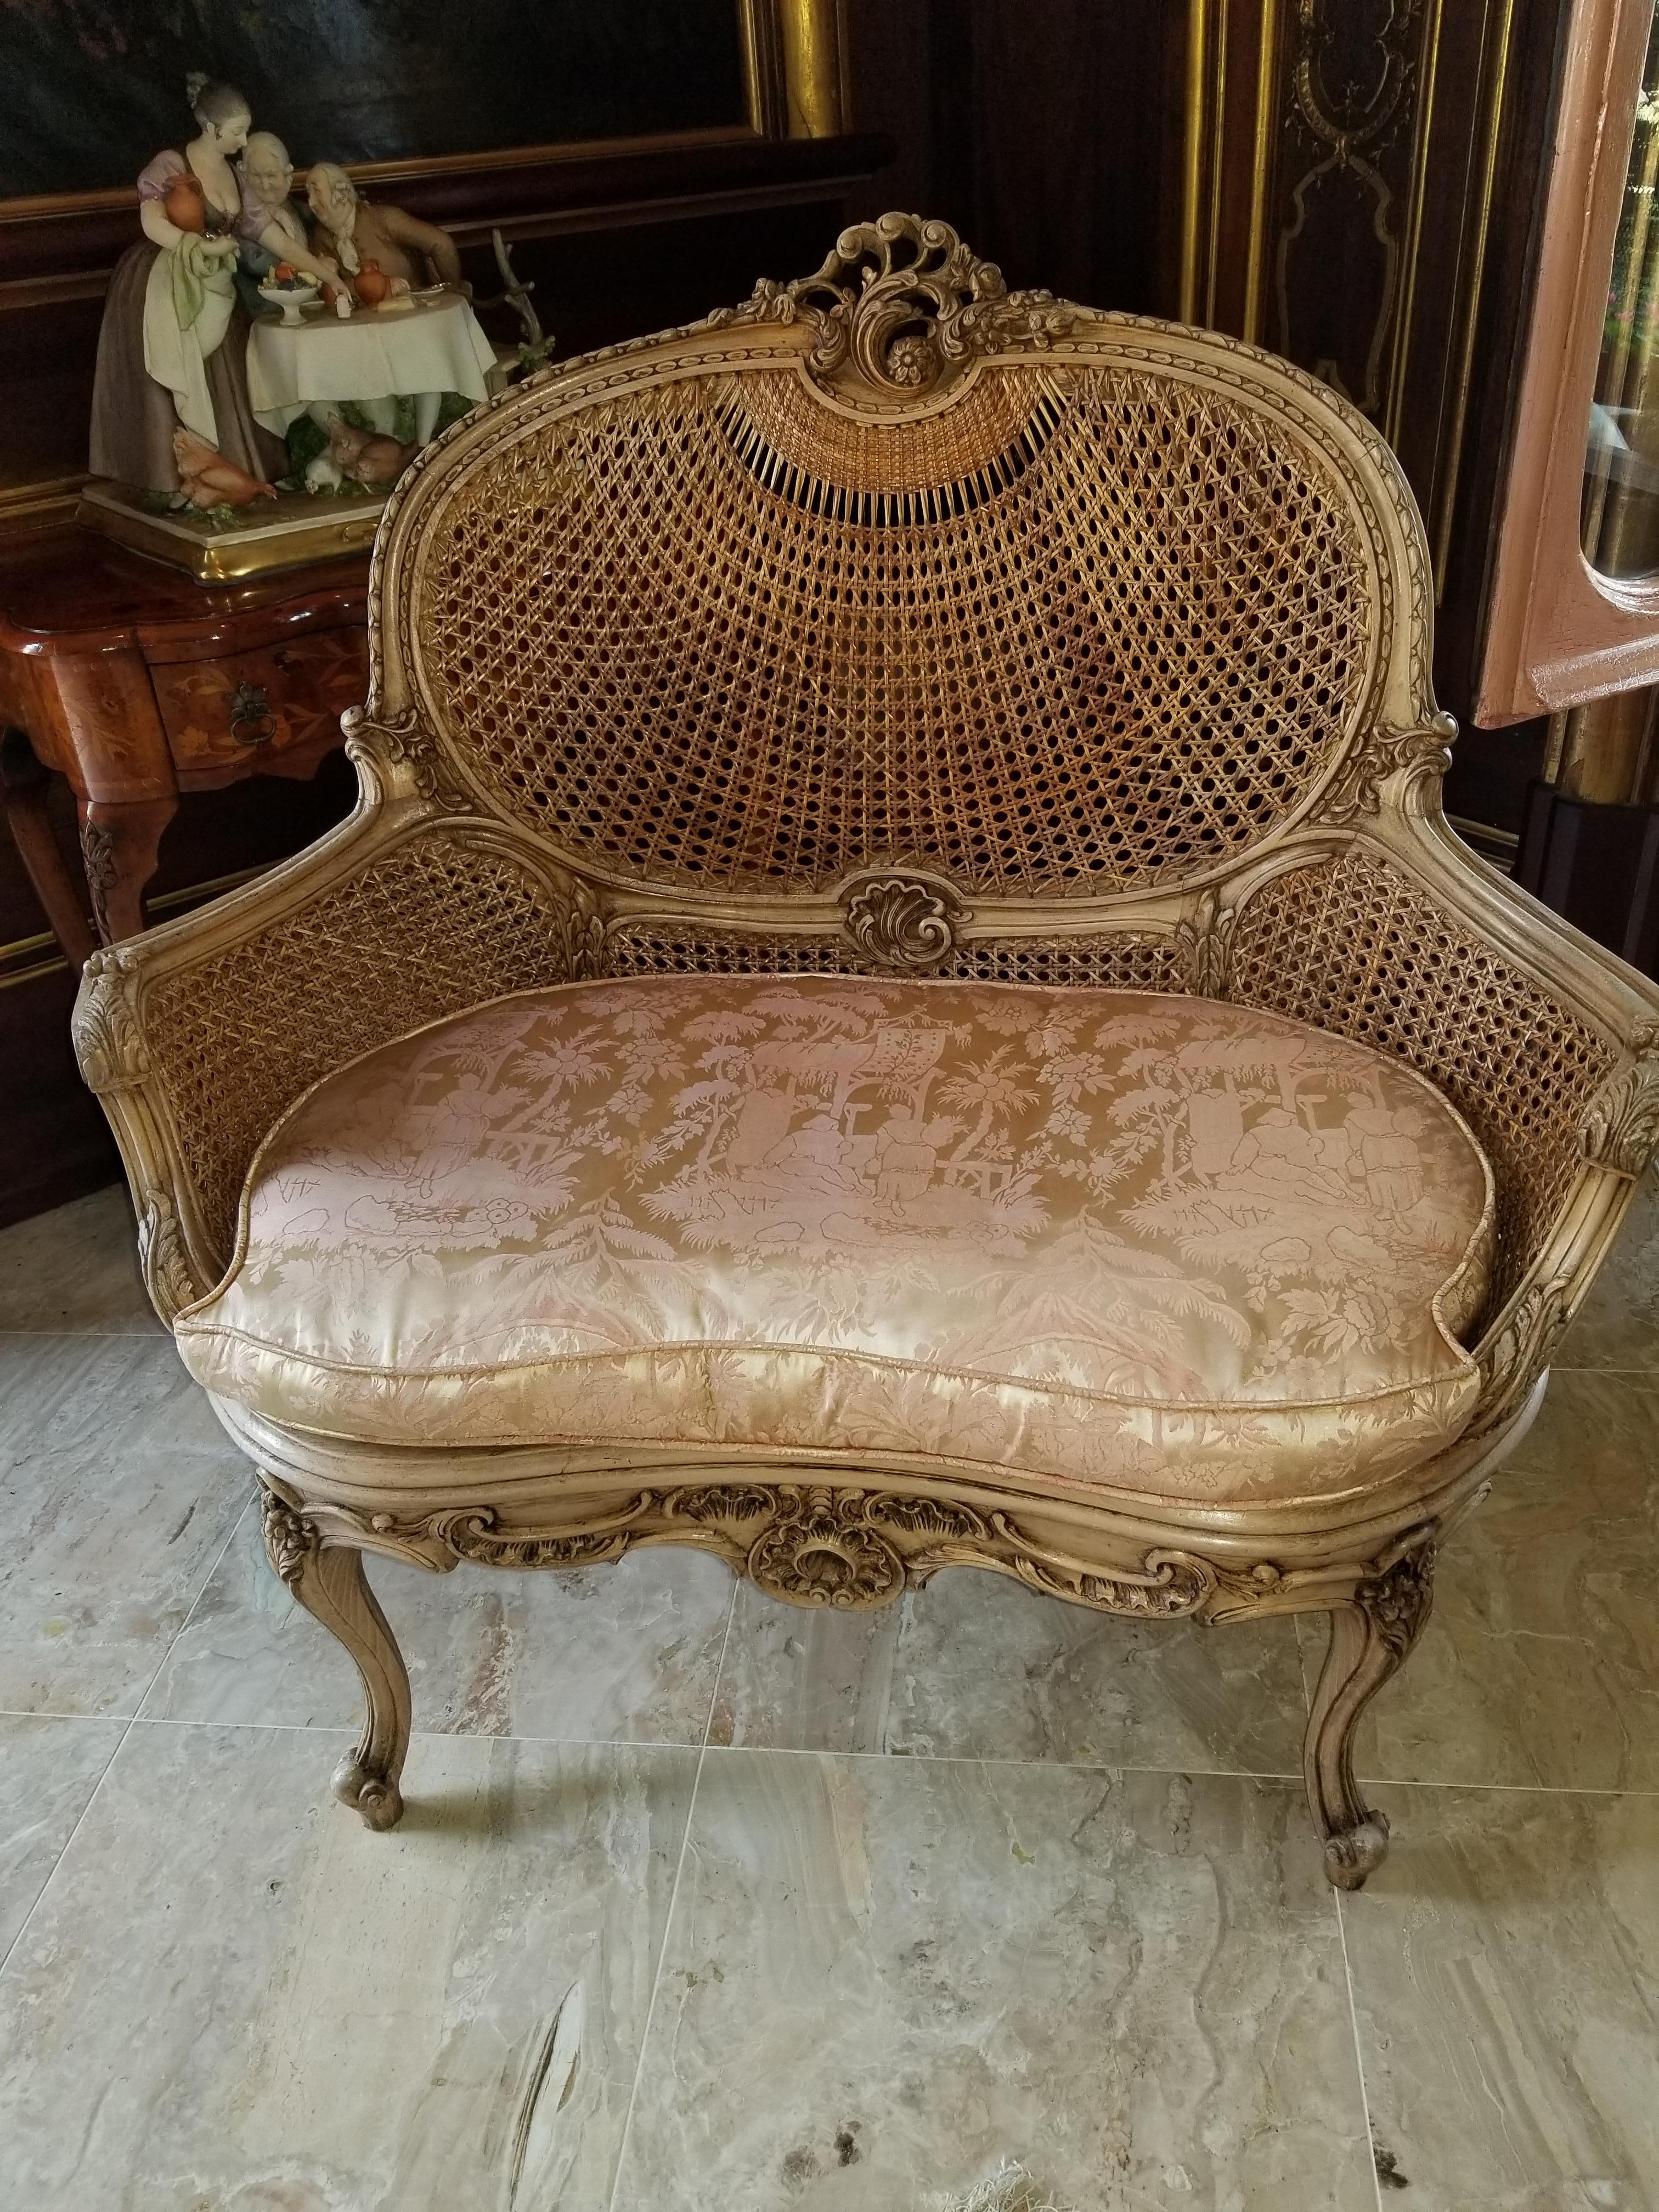 20th century pair of Louis XV natural wood settee with caning back and seat. Sides have double caning.  Fabric needs to be replaced
 